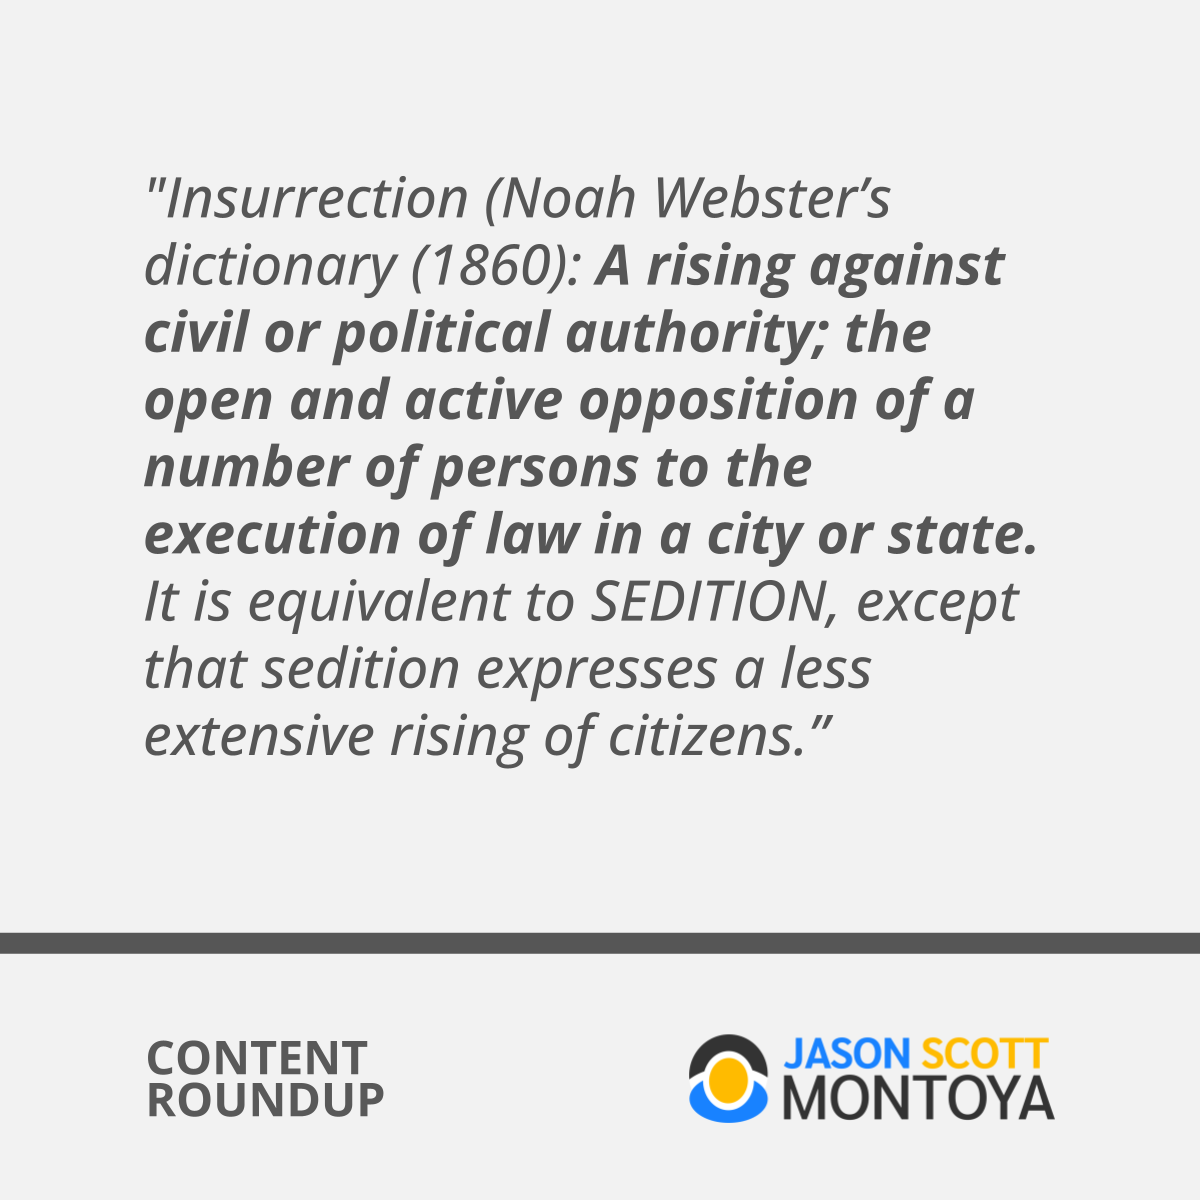 "Insurrection (Noah Webster’s dictionary (1860): A rising against civil or political authority; the open and active opposition of a number of persons to the execution of law in a city or state. It is equivalent to SEDITION, except that sedition expresses a less extensive rising of citizens.”